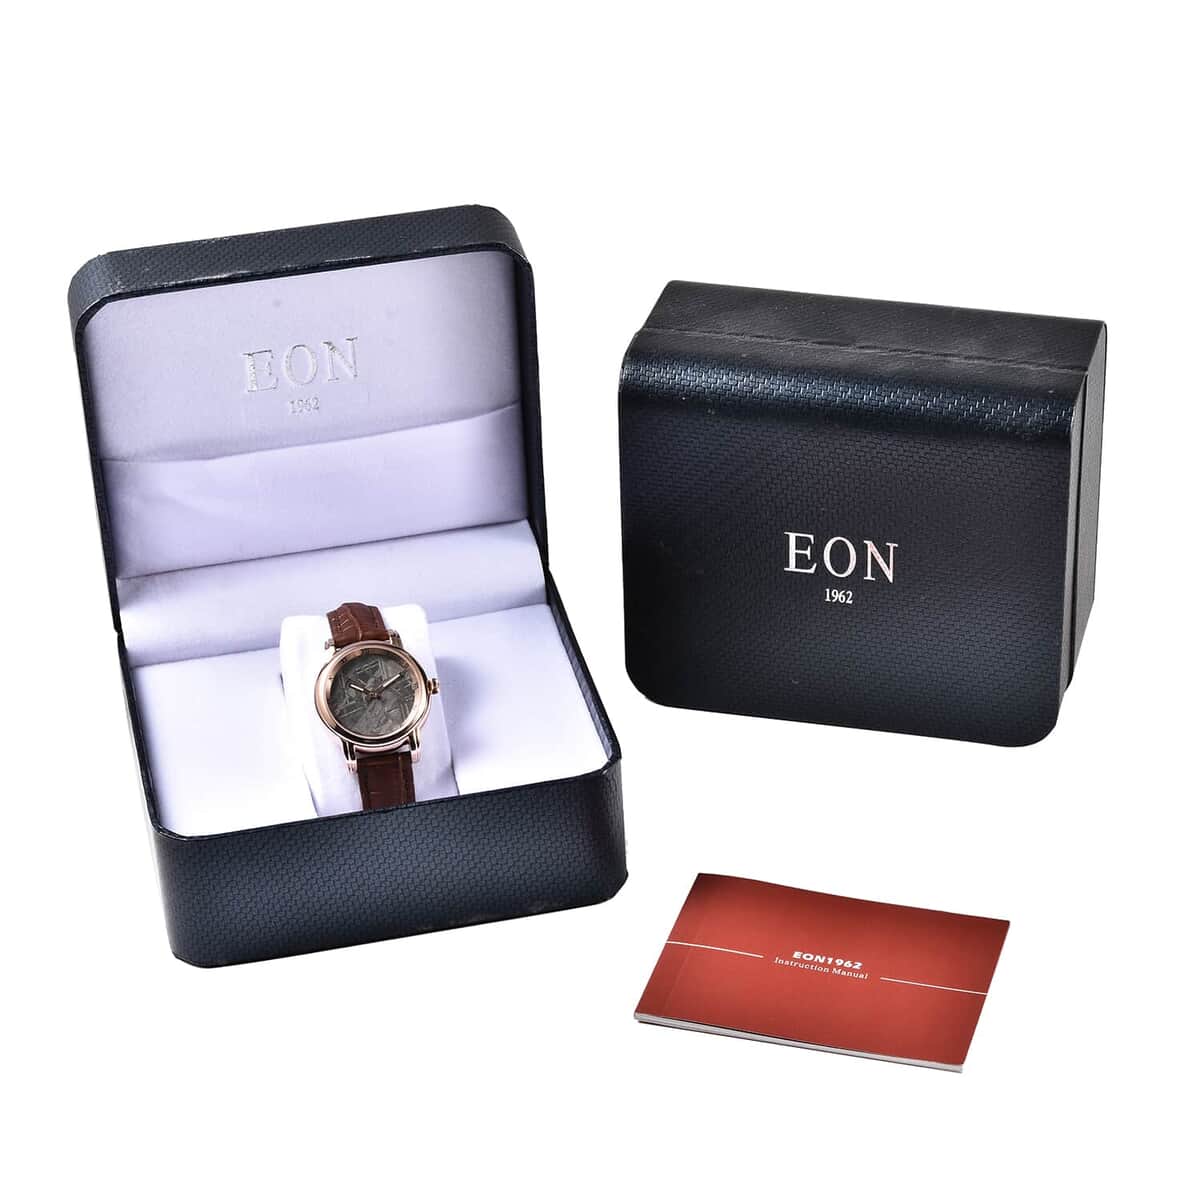 Eon 1962 Swiss Movement Watch with Marvelous Meteorite Dial & Light Brown Leather Strap, Designer Gemstone Watch, Analog Luxury Wristwatch image number 7